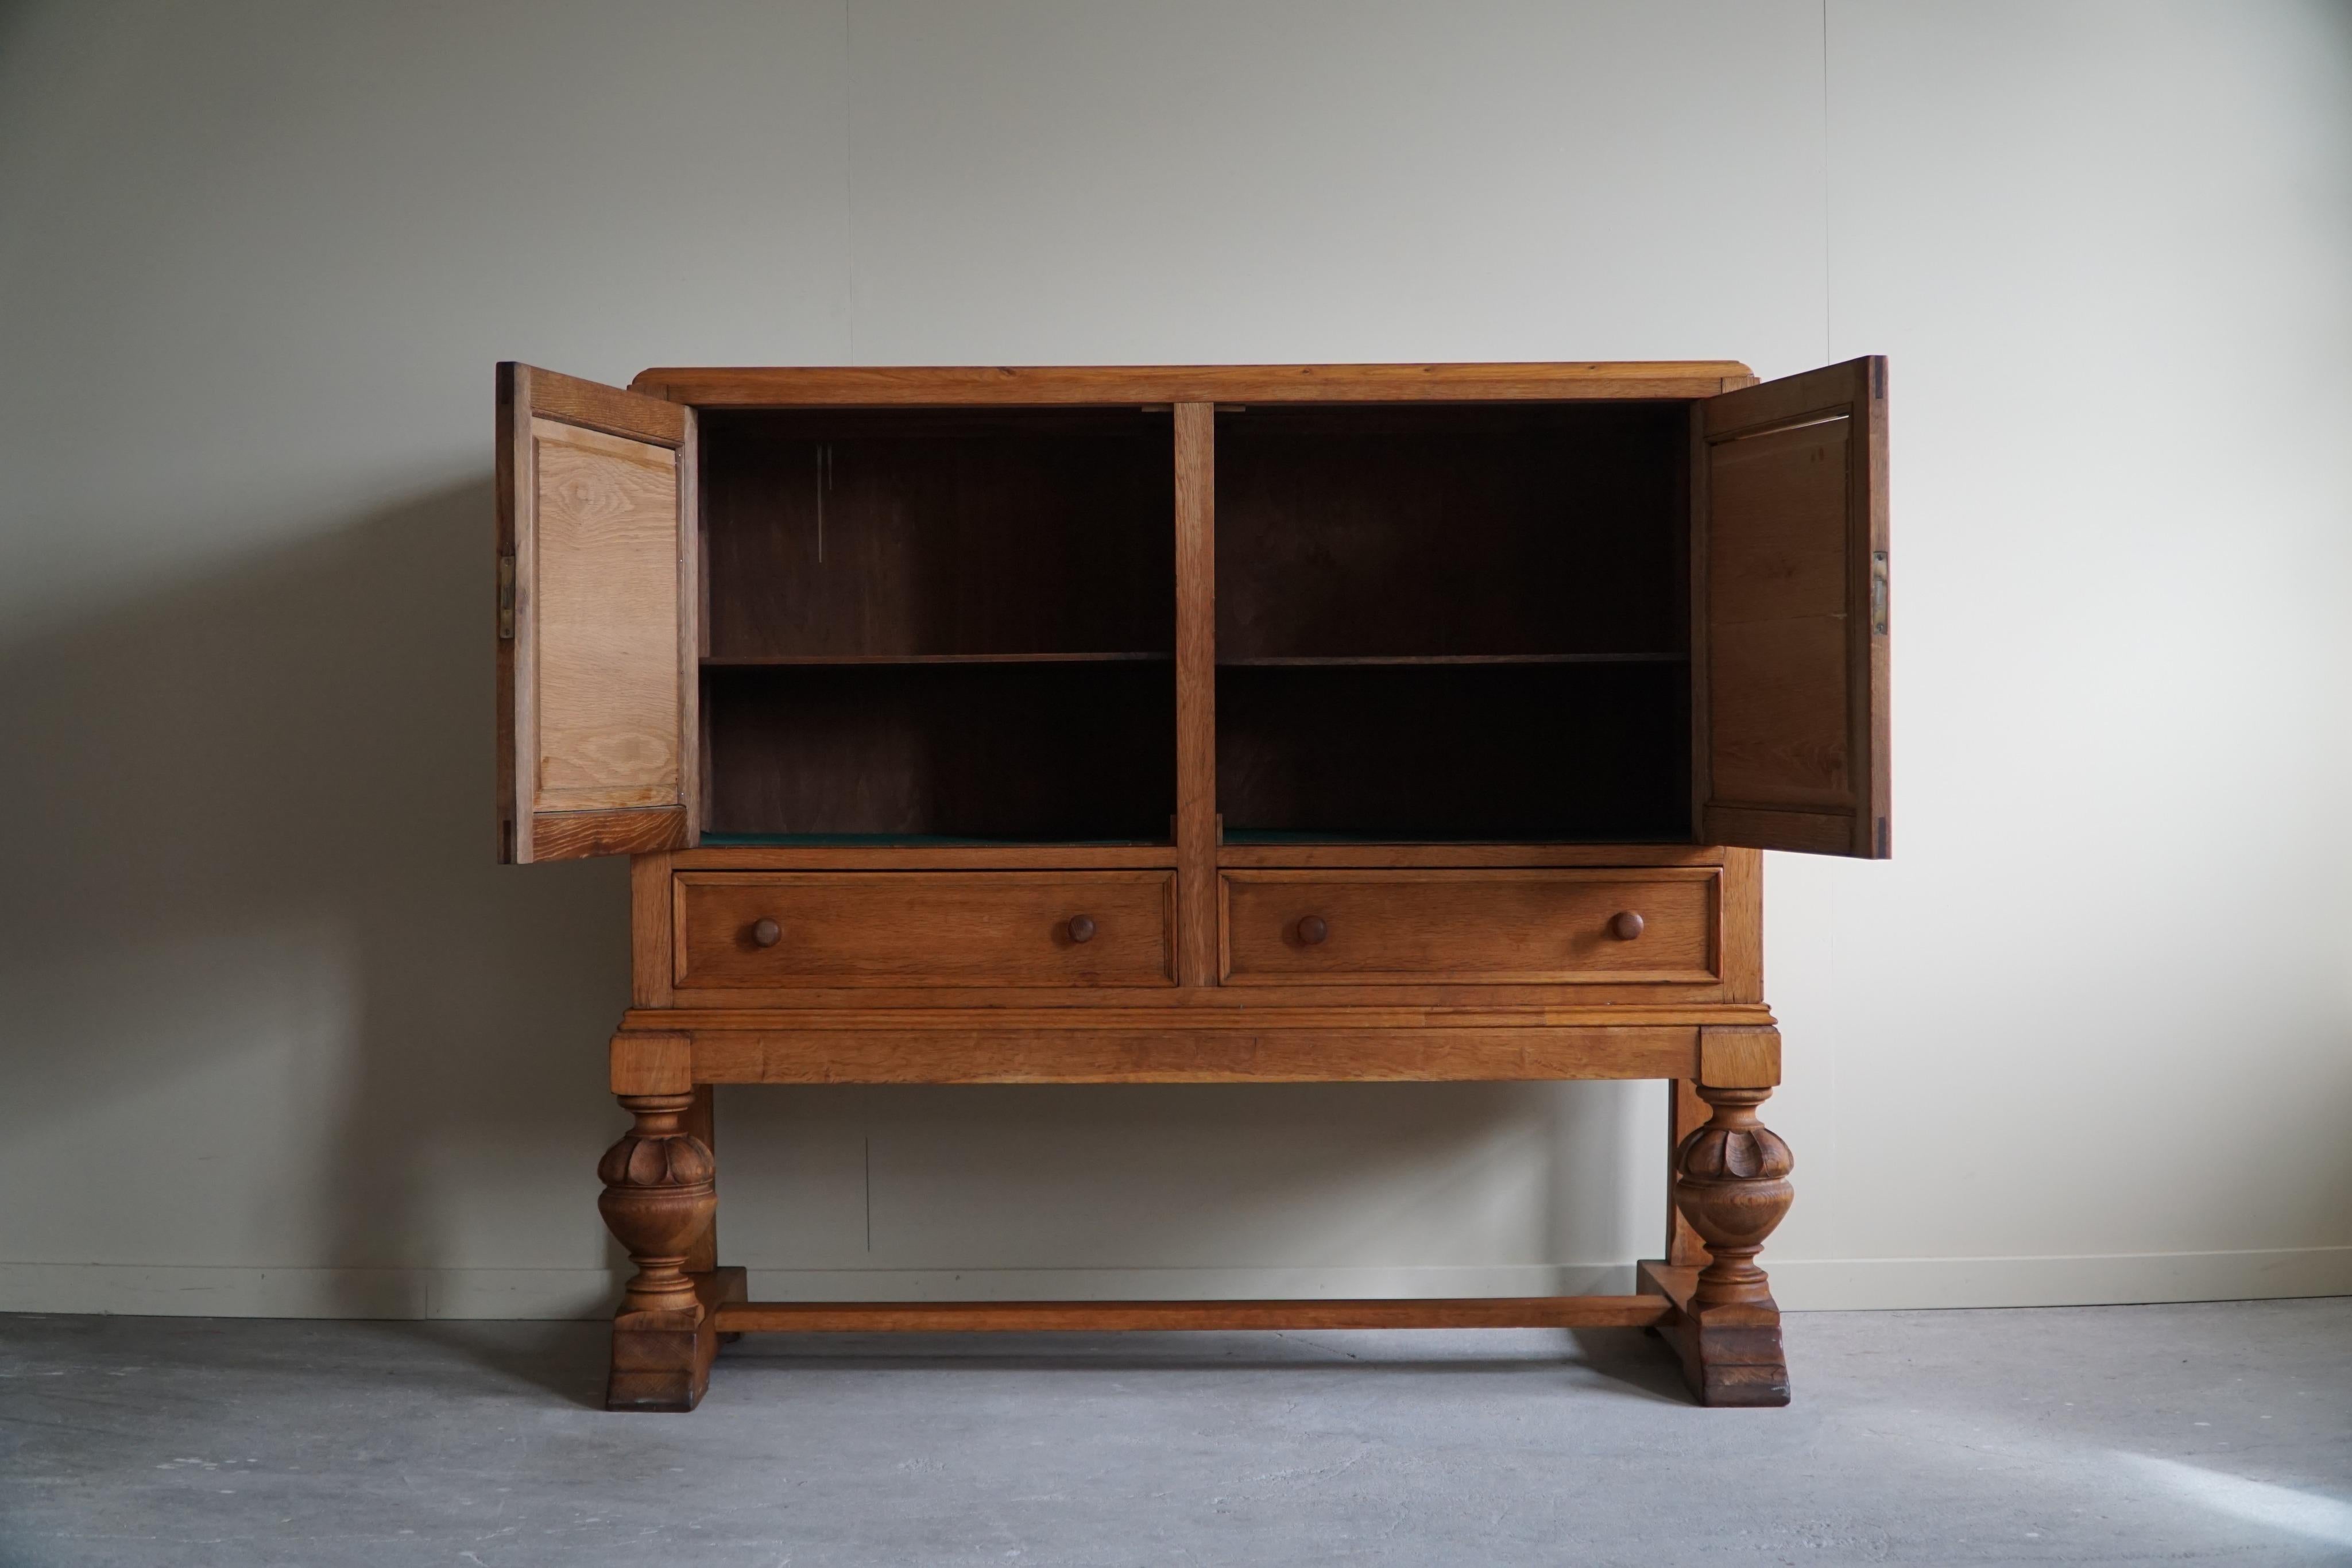 Hand-Crafted Handcrafted Cabinet in Oak, Mid Century, Made by a Danish Carpenter in the 1950s For Sale